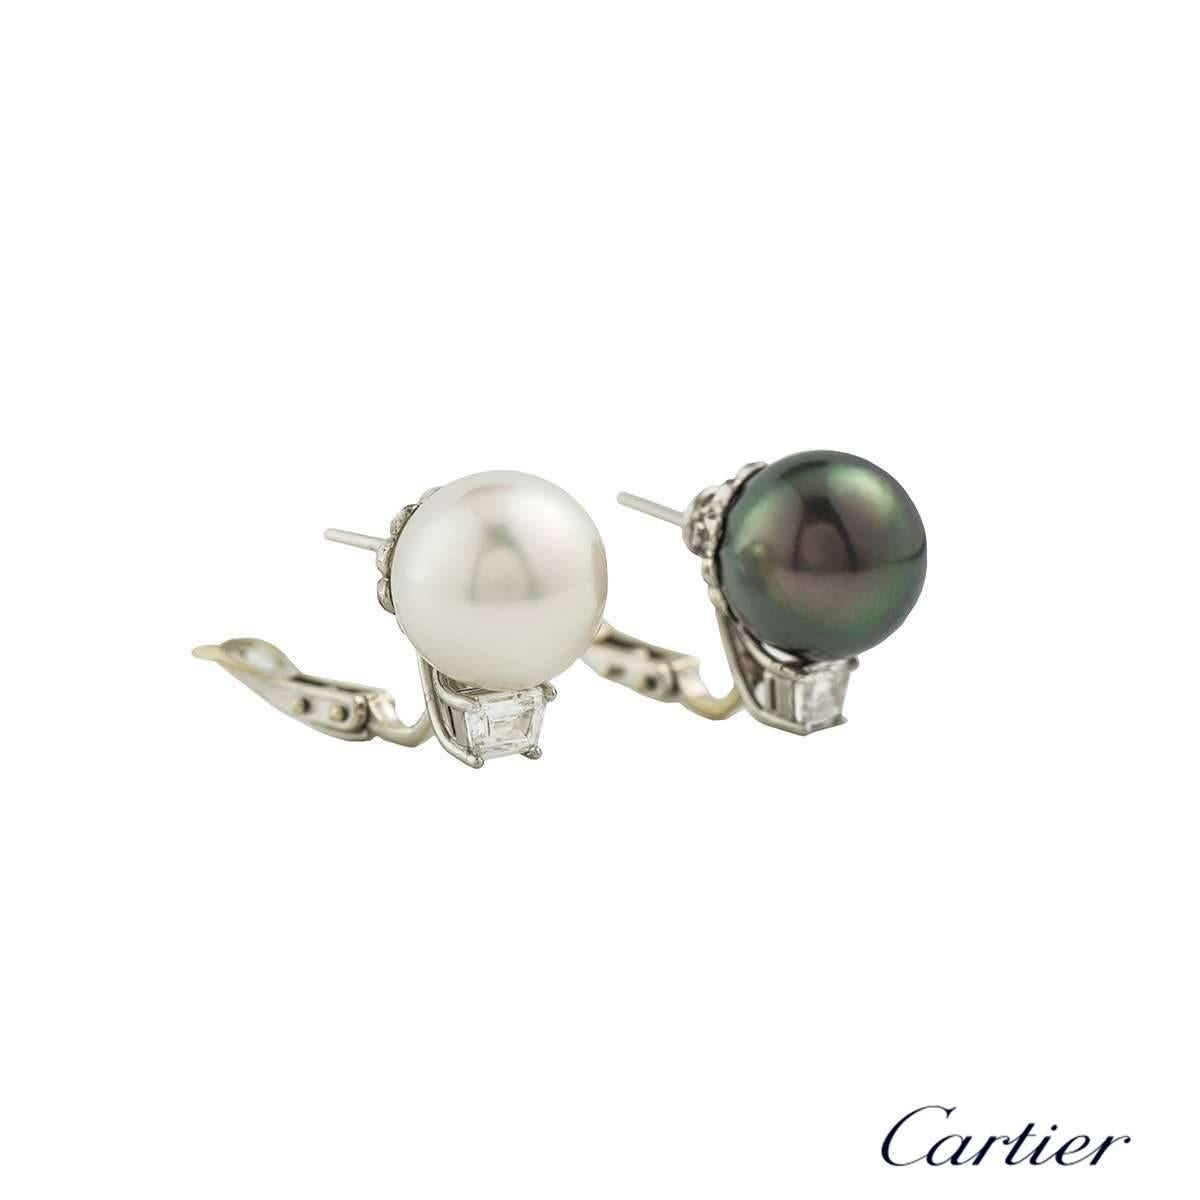 A beautiful pair of Cartier pearl and diamond earrings in Platinum. The earrings are composed of 1 tahitian pearl and 1 south sea pearl finished off with a trapezoid diamond each. The diamonds are an approximate weight of 0.60ct, G+ colour and VS+